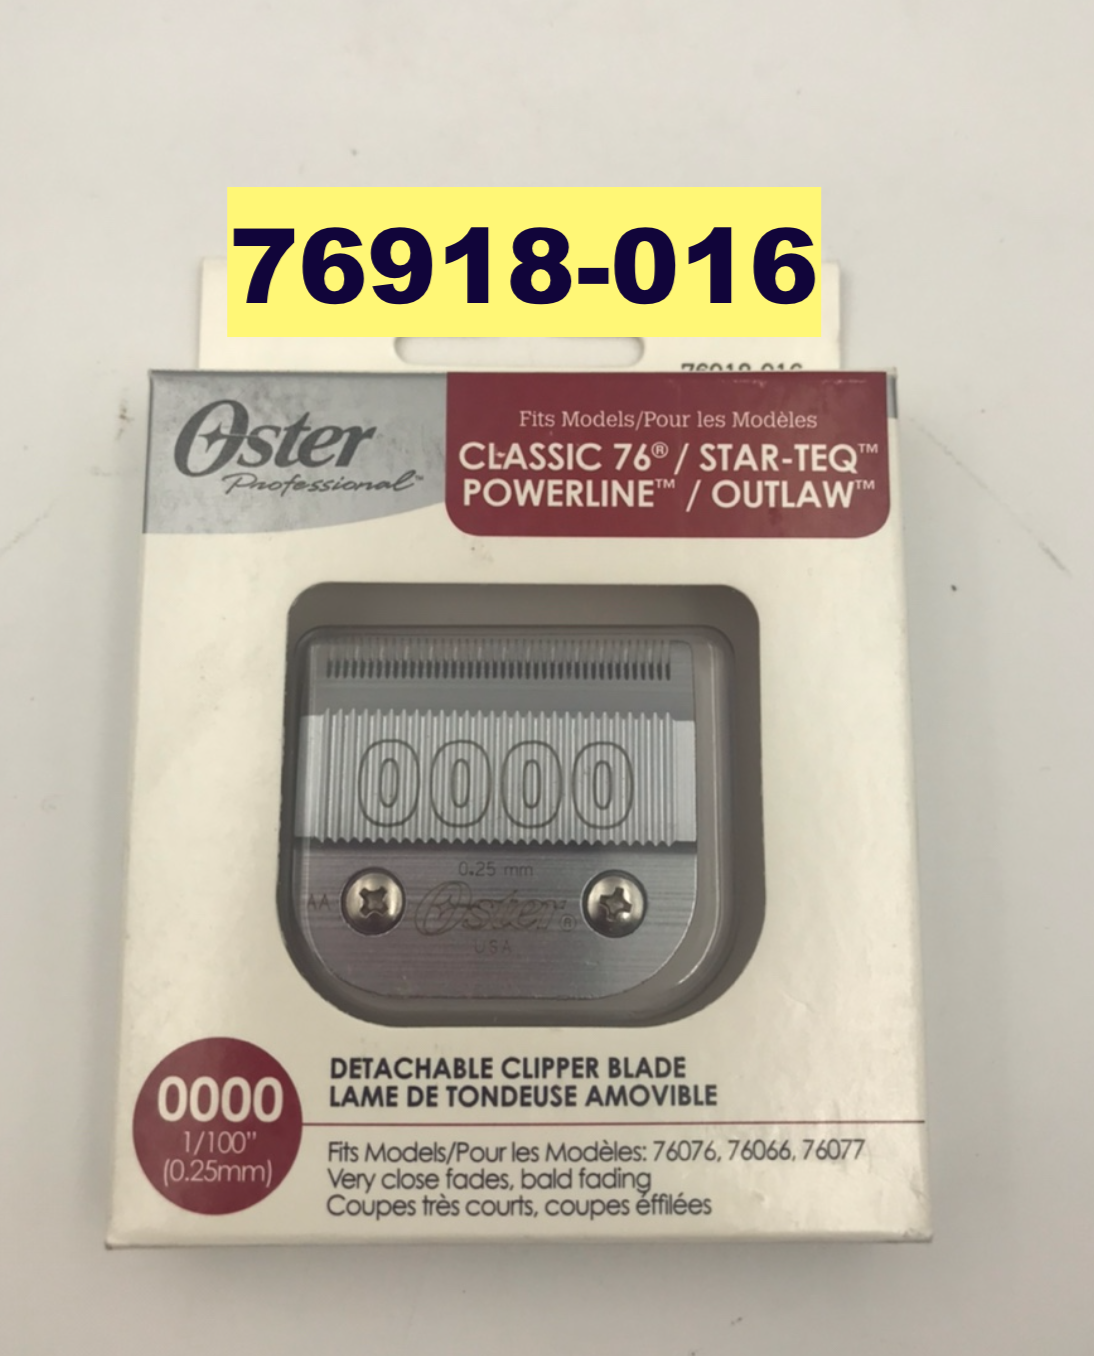 Primary image for OSTER PROFESSIONAL CLASSIC76 DETACHABLE CLIPPER BLADE 0000 1/100" # 076918-016